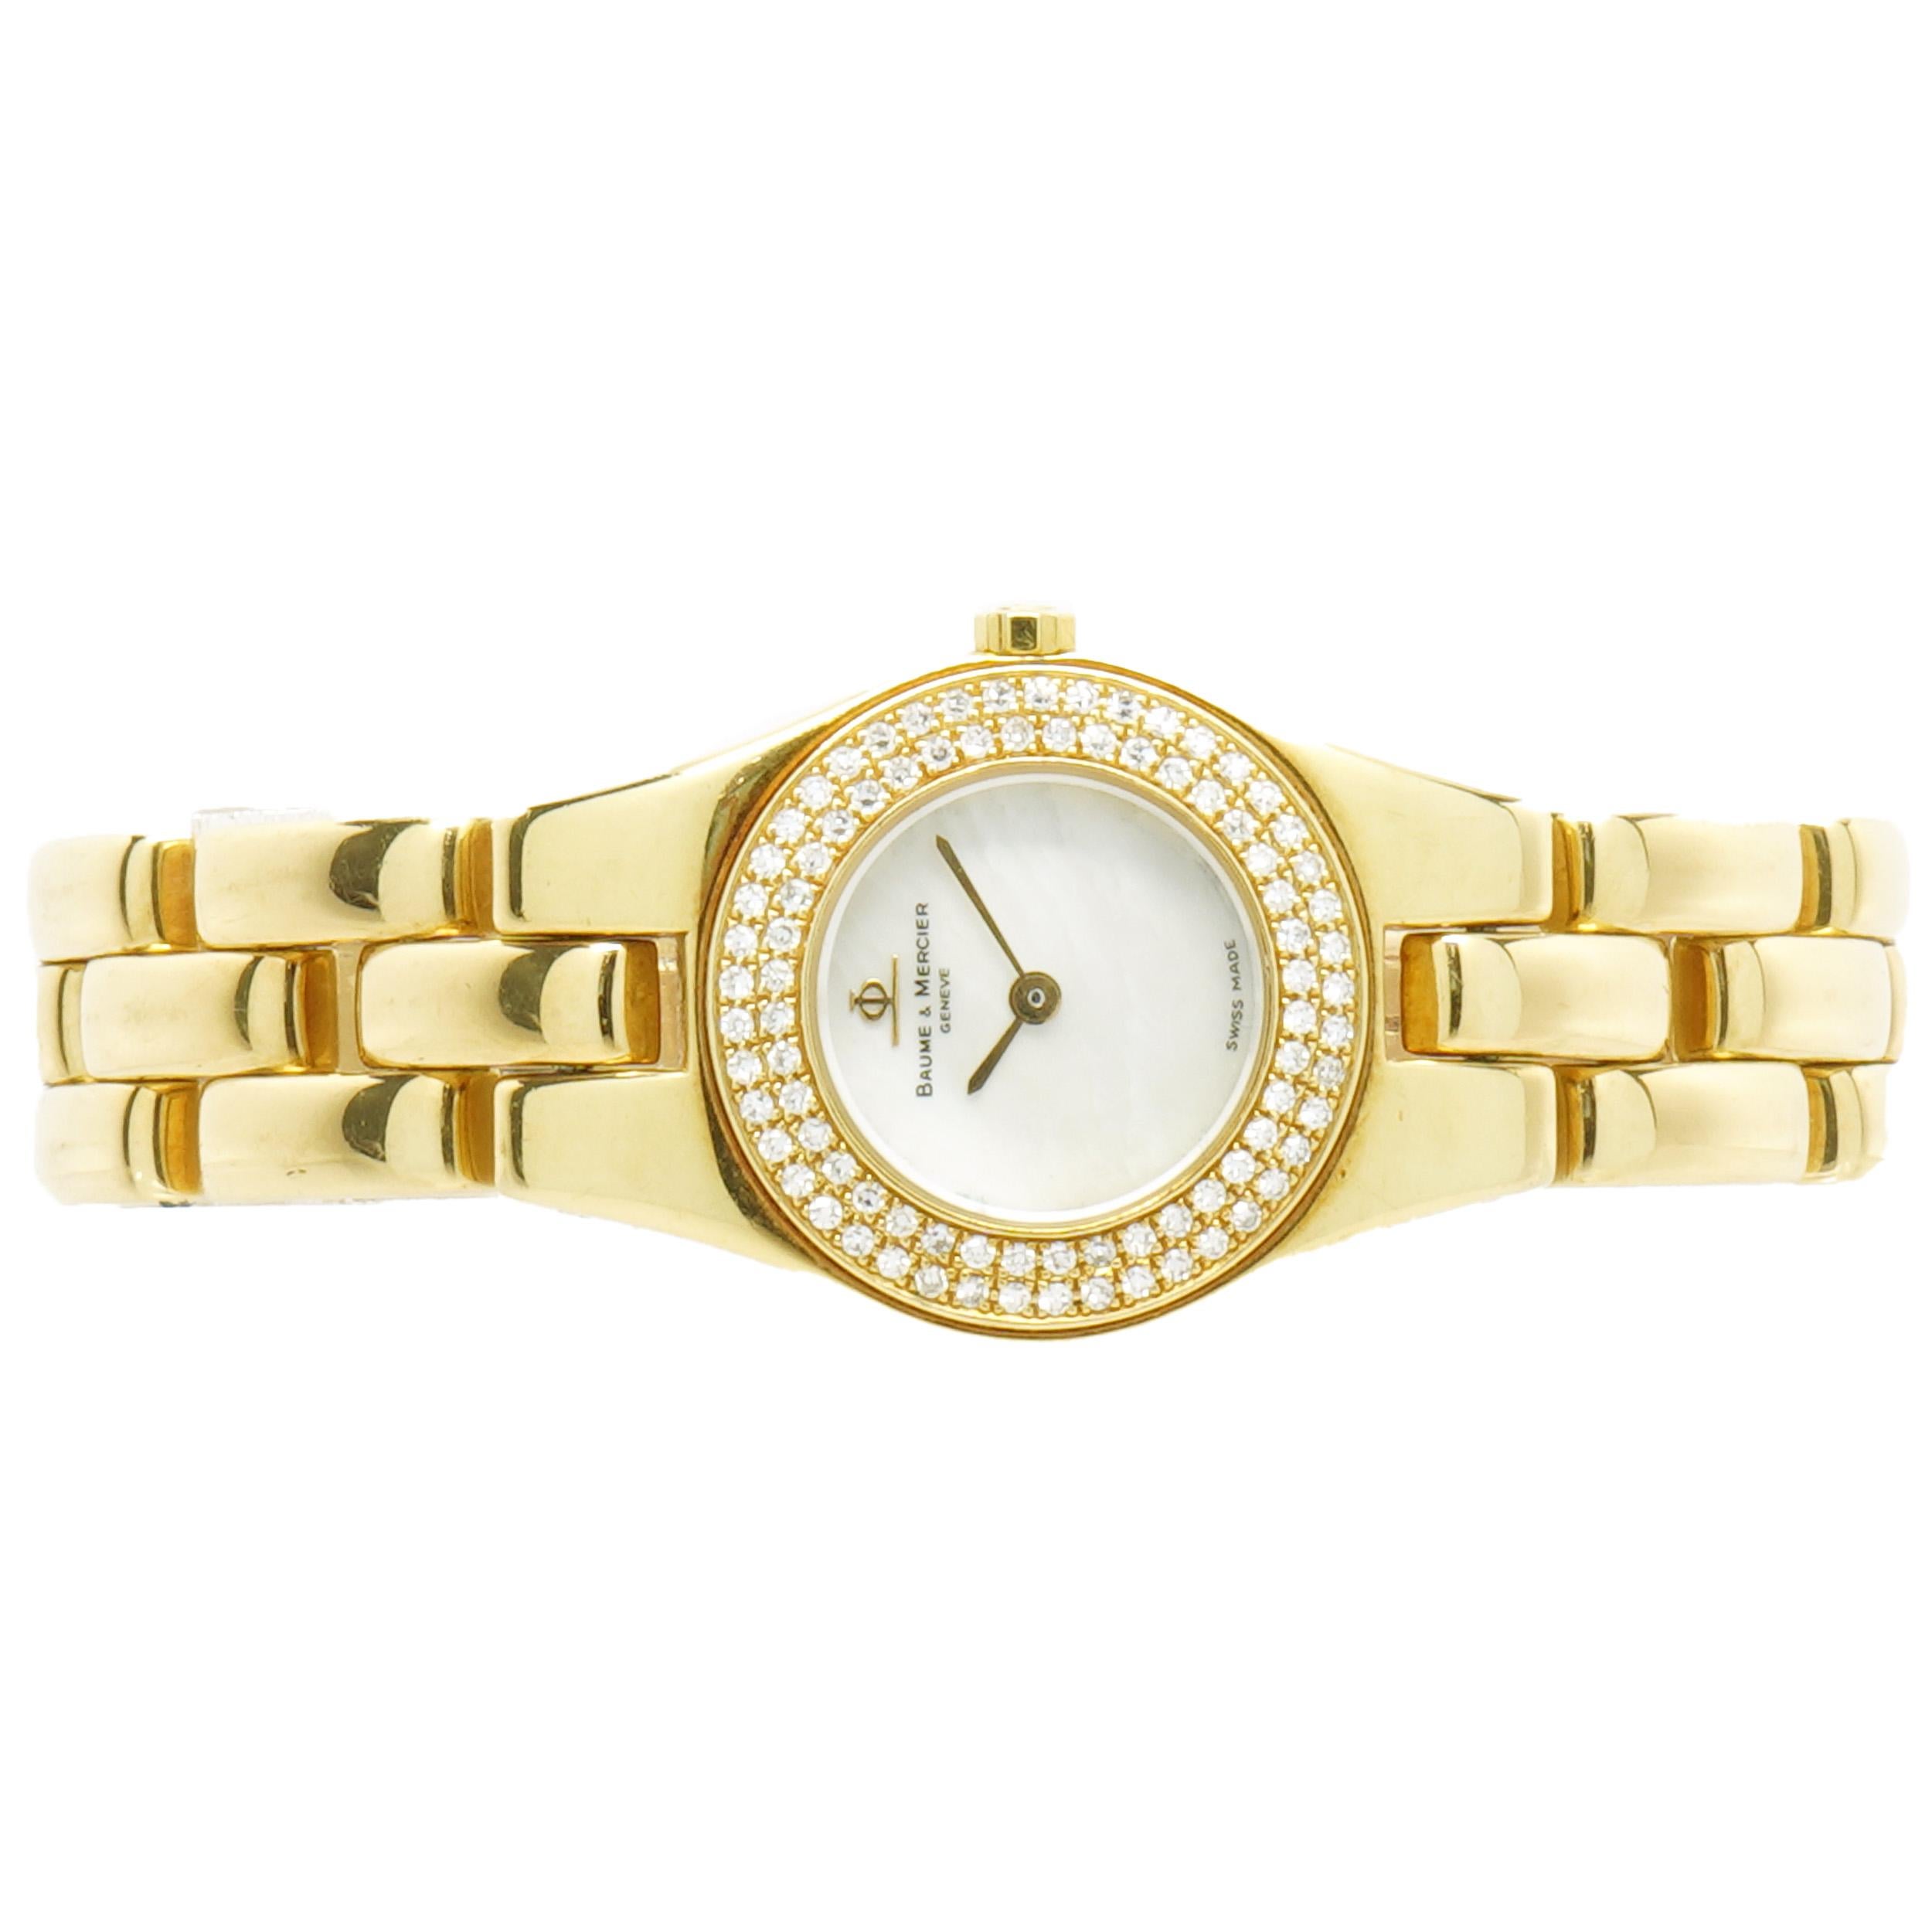 Movement: quartz
Function: hours, minutes
Case: 22.5mm 18K yellow gold round case, double row diamond bezel, sapphire crystal, push/pull crown
Band: 18K yellow gold bracelet, integrated clasp
Dial: mother of pearl
Serial #: 2850XXX
Reference: